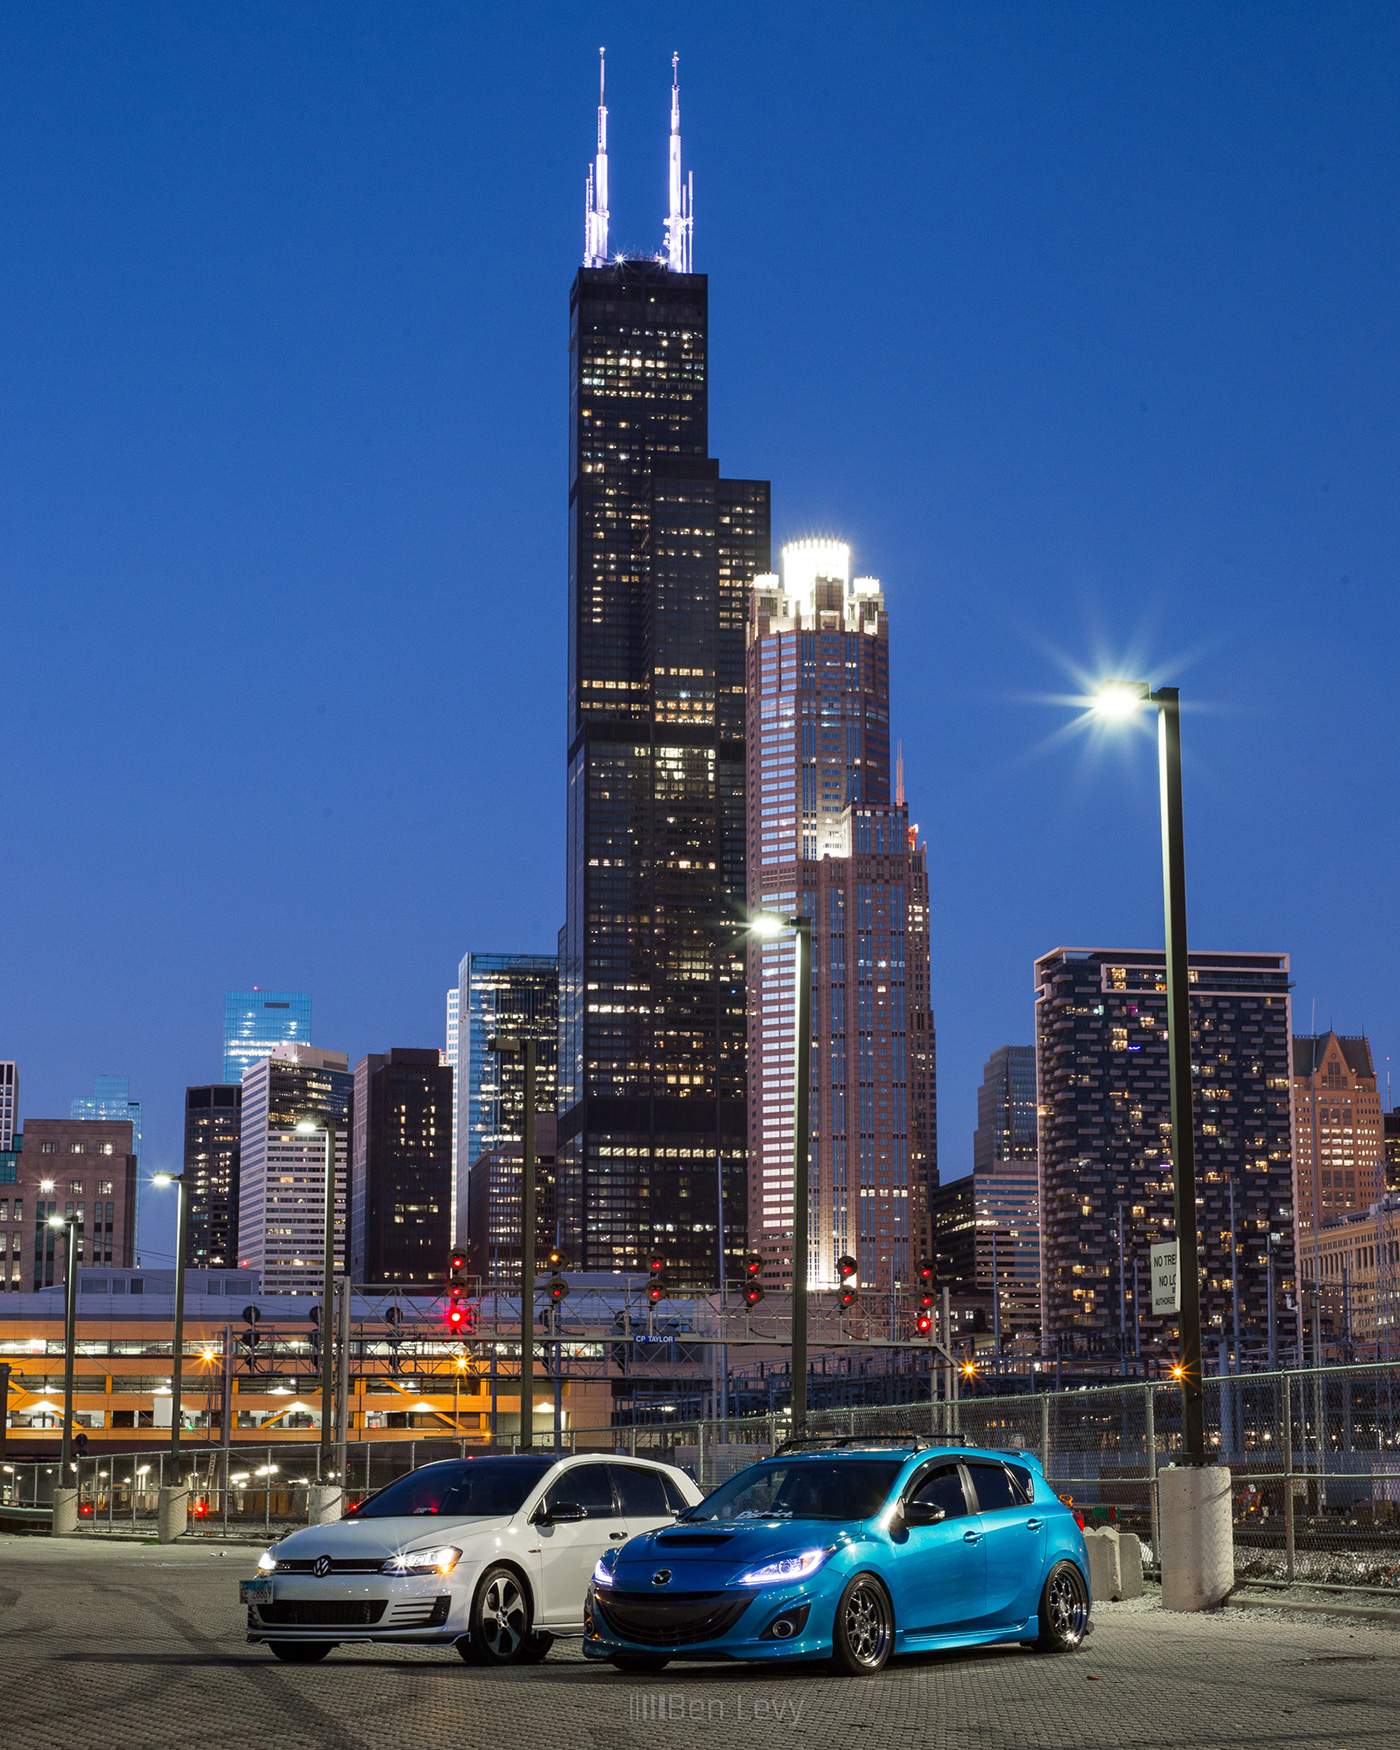 Nighttime Photoshoot with the Chicago Skyline